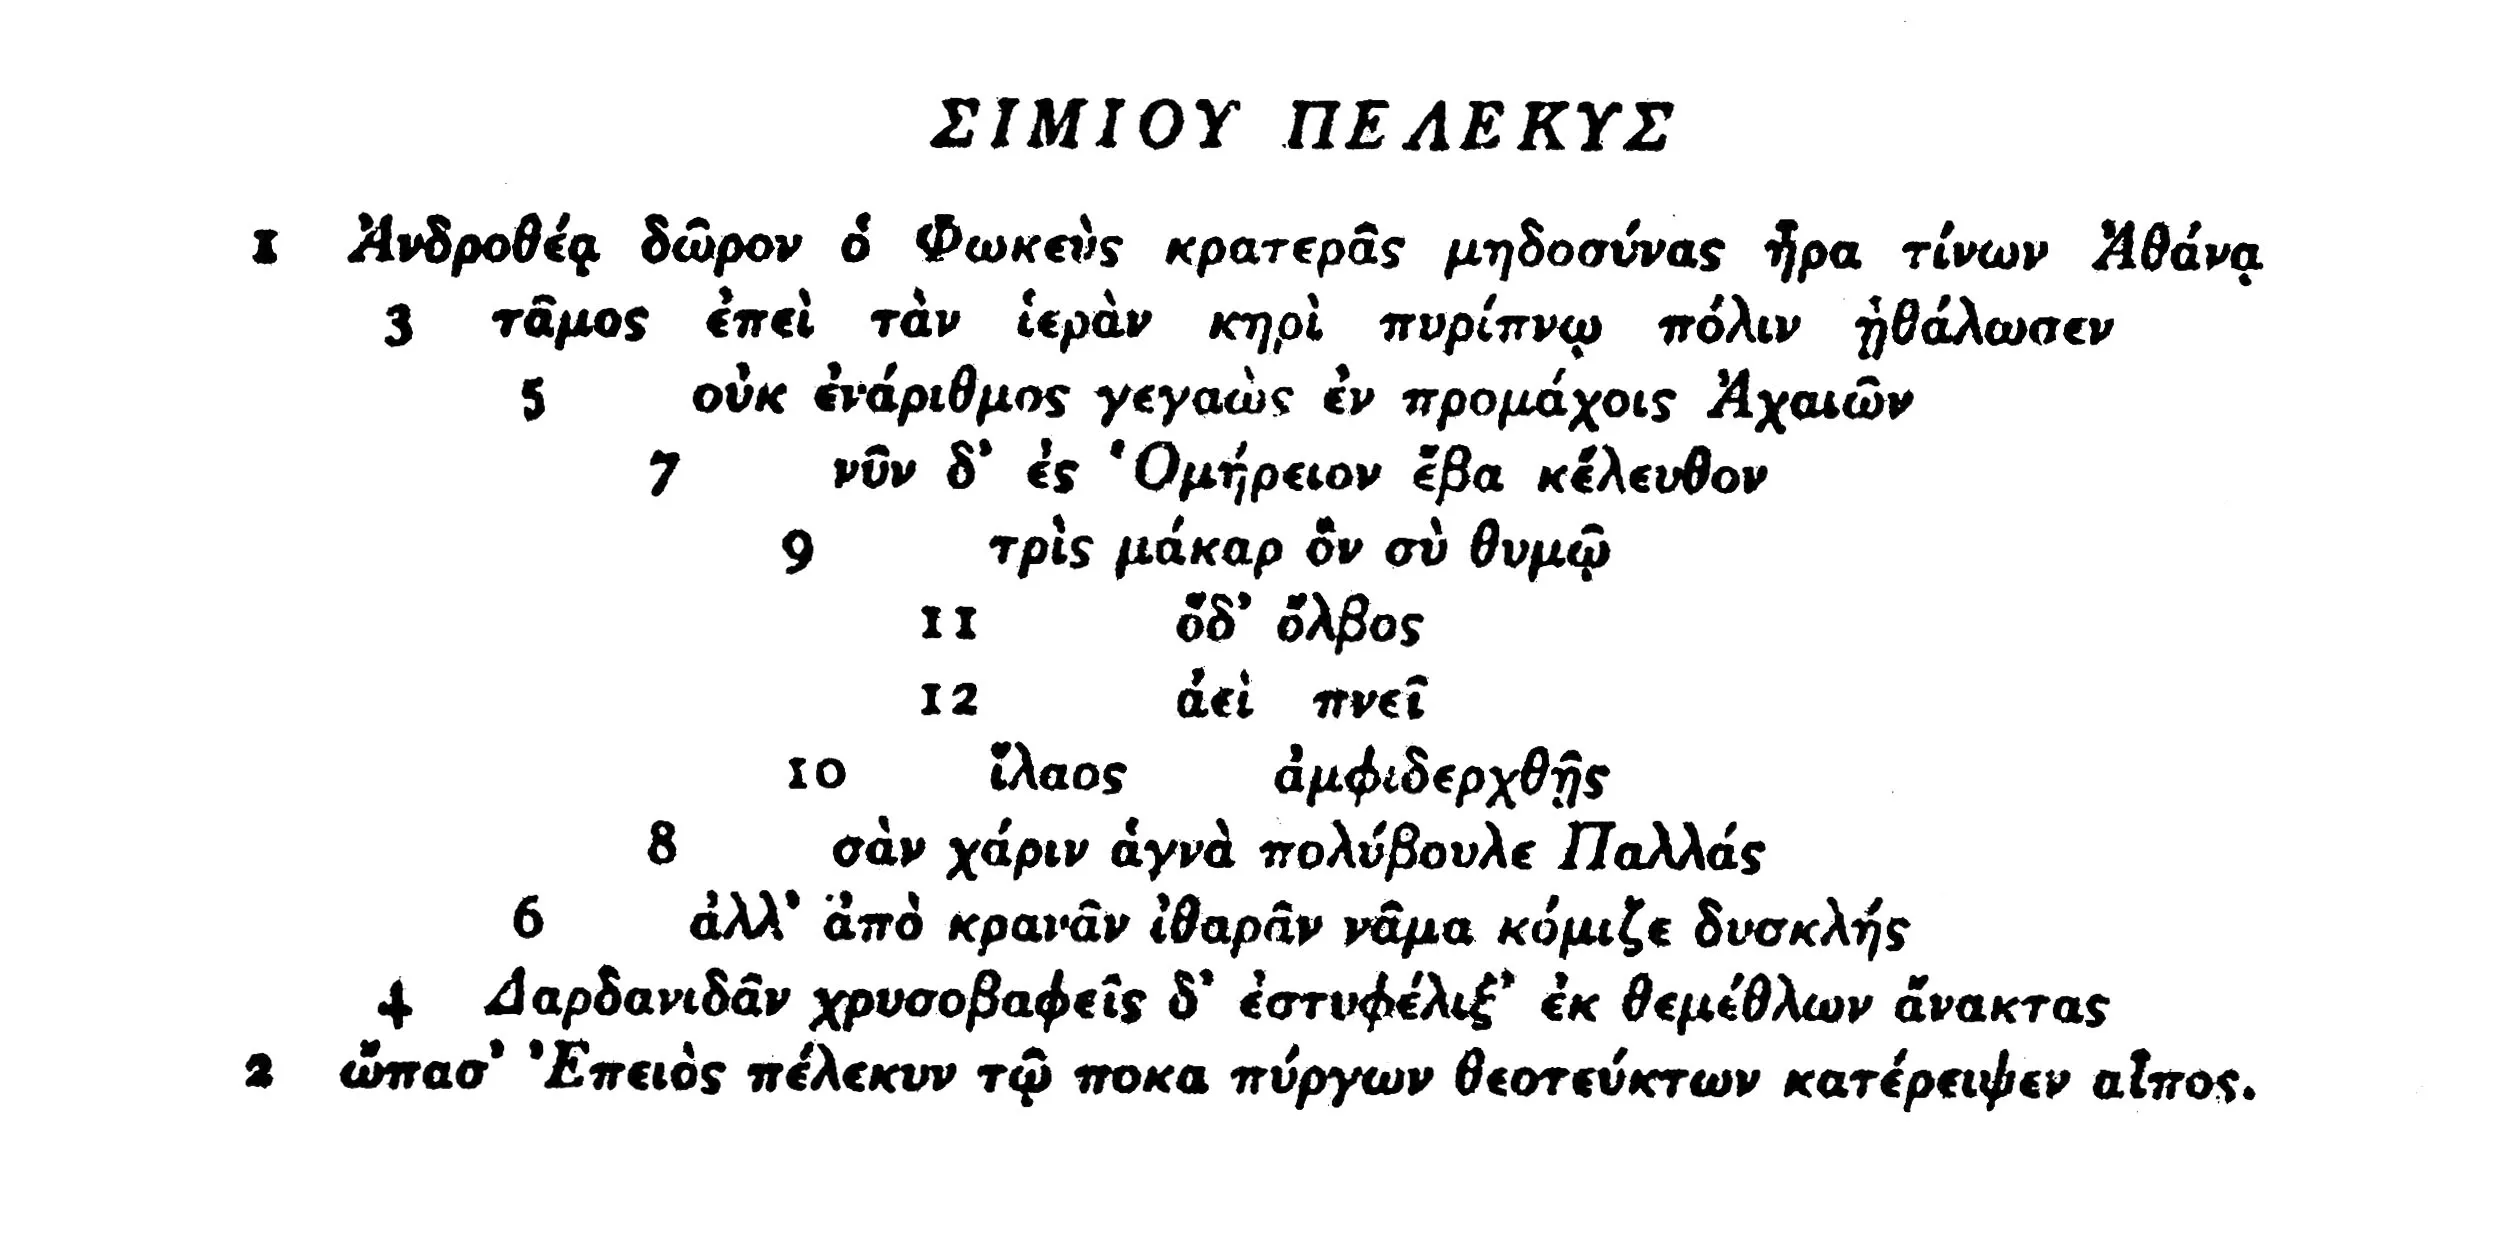  Simmias, ‘Axe’ (= AP 15.22). (Text and typesetting by C. Luz)